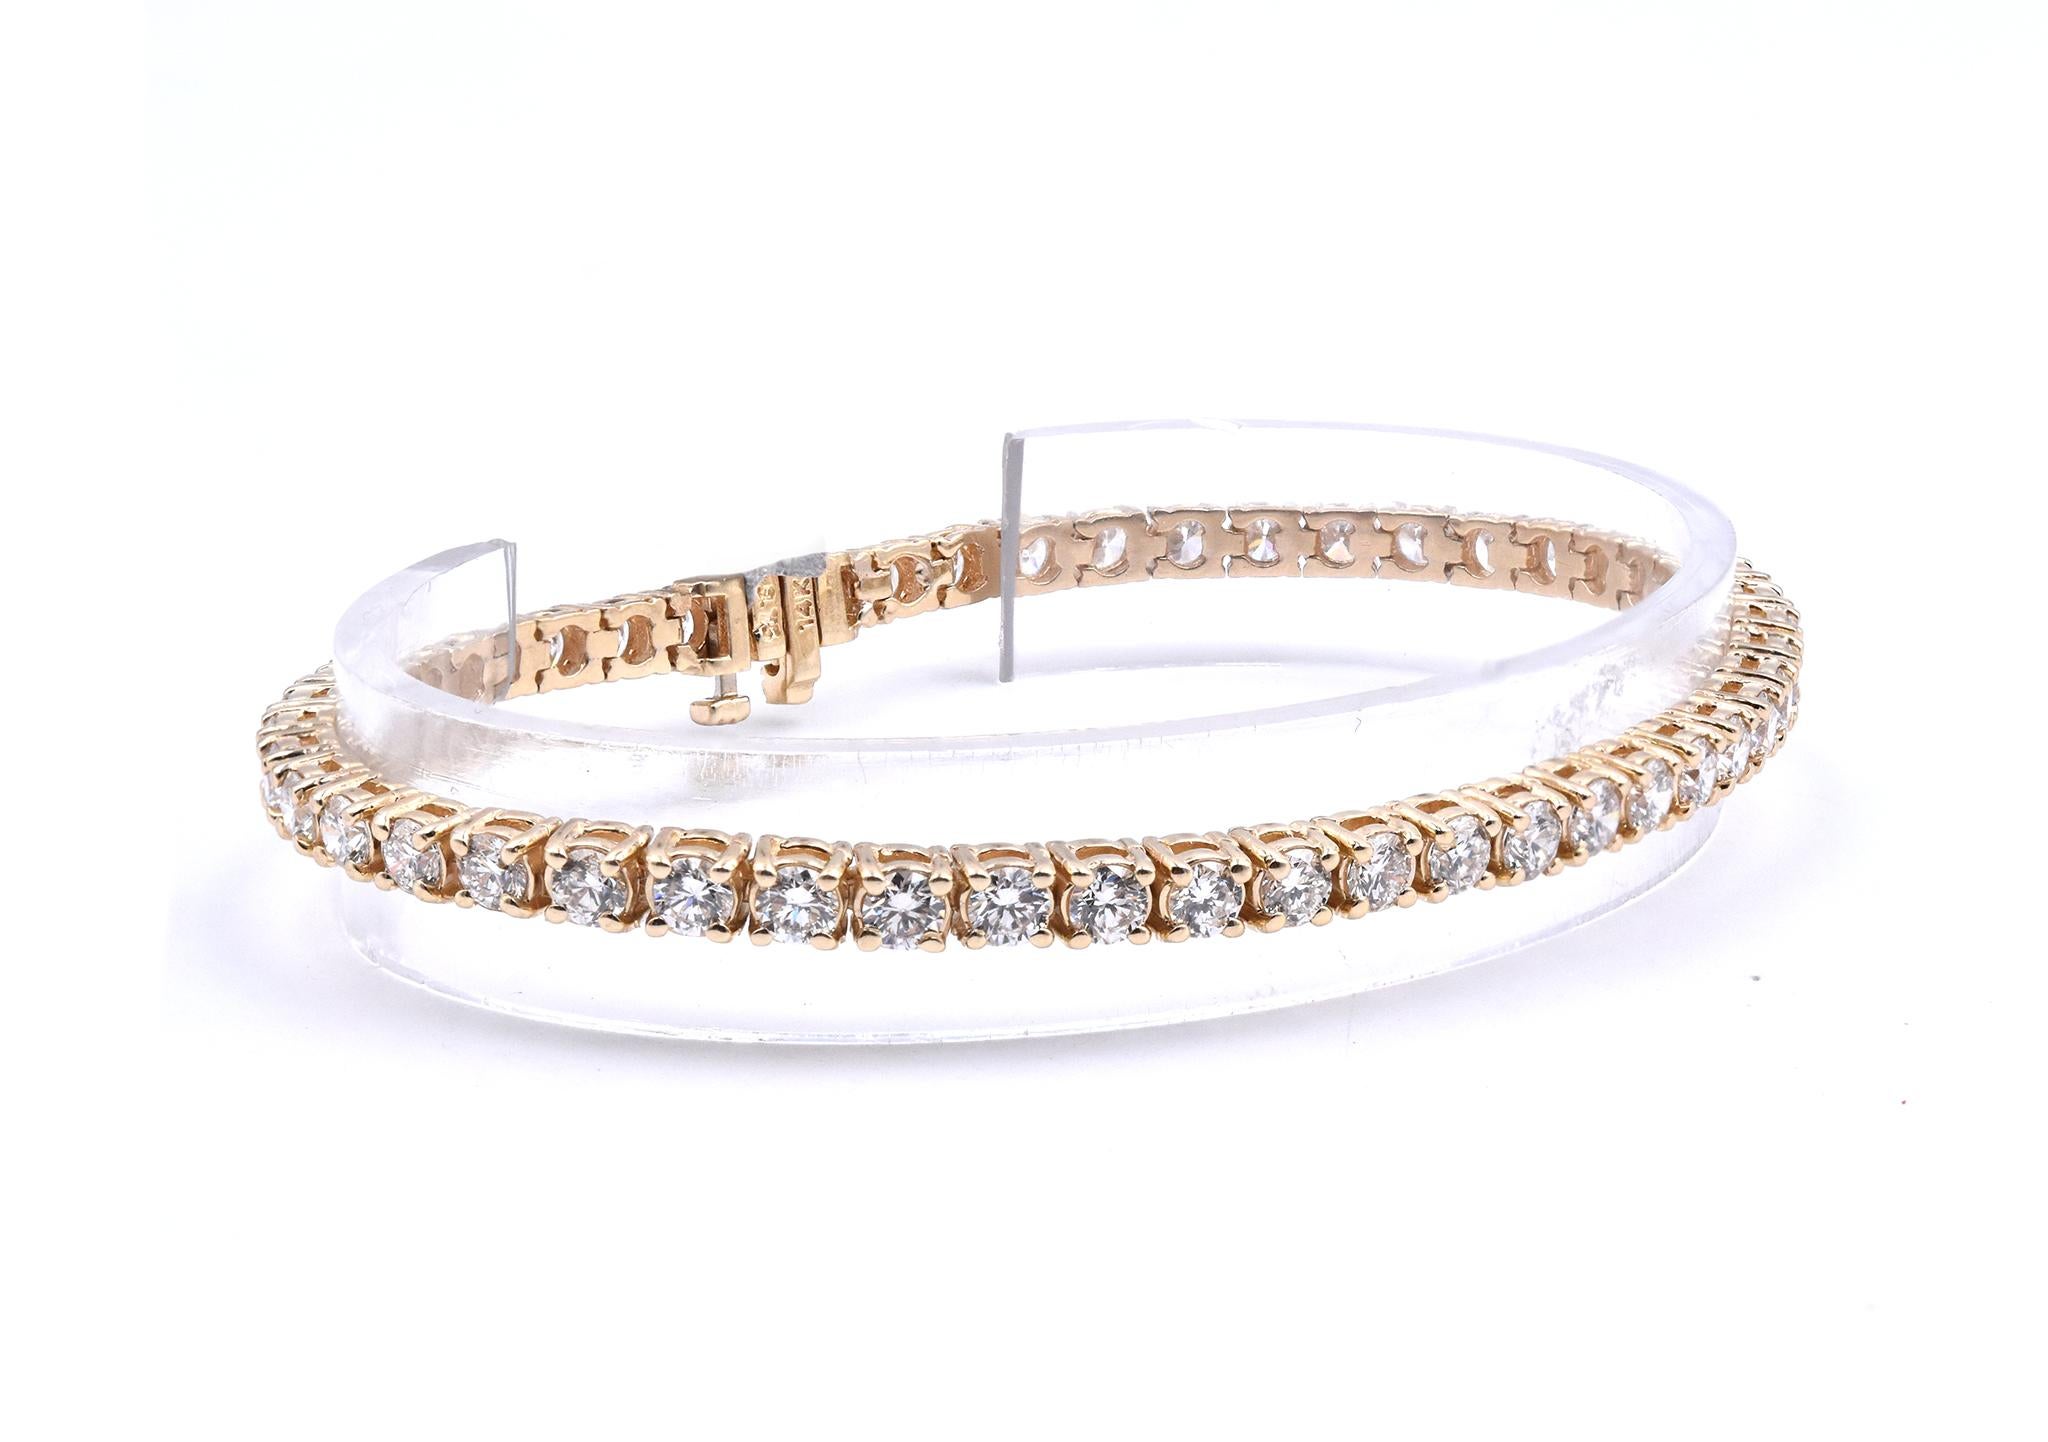 Material: 14K yellow gold
Diamonds: 49 round brilliant cut = 7.85cttw
Color: H
Clarity: VS2
Dimensions: bracelet will fit up to a 8-inch wrist
Weight: 17.16 grams
